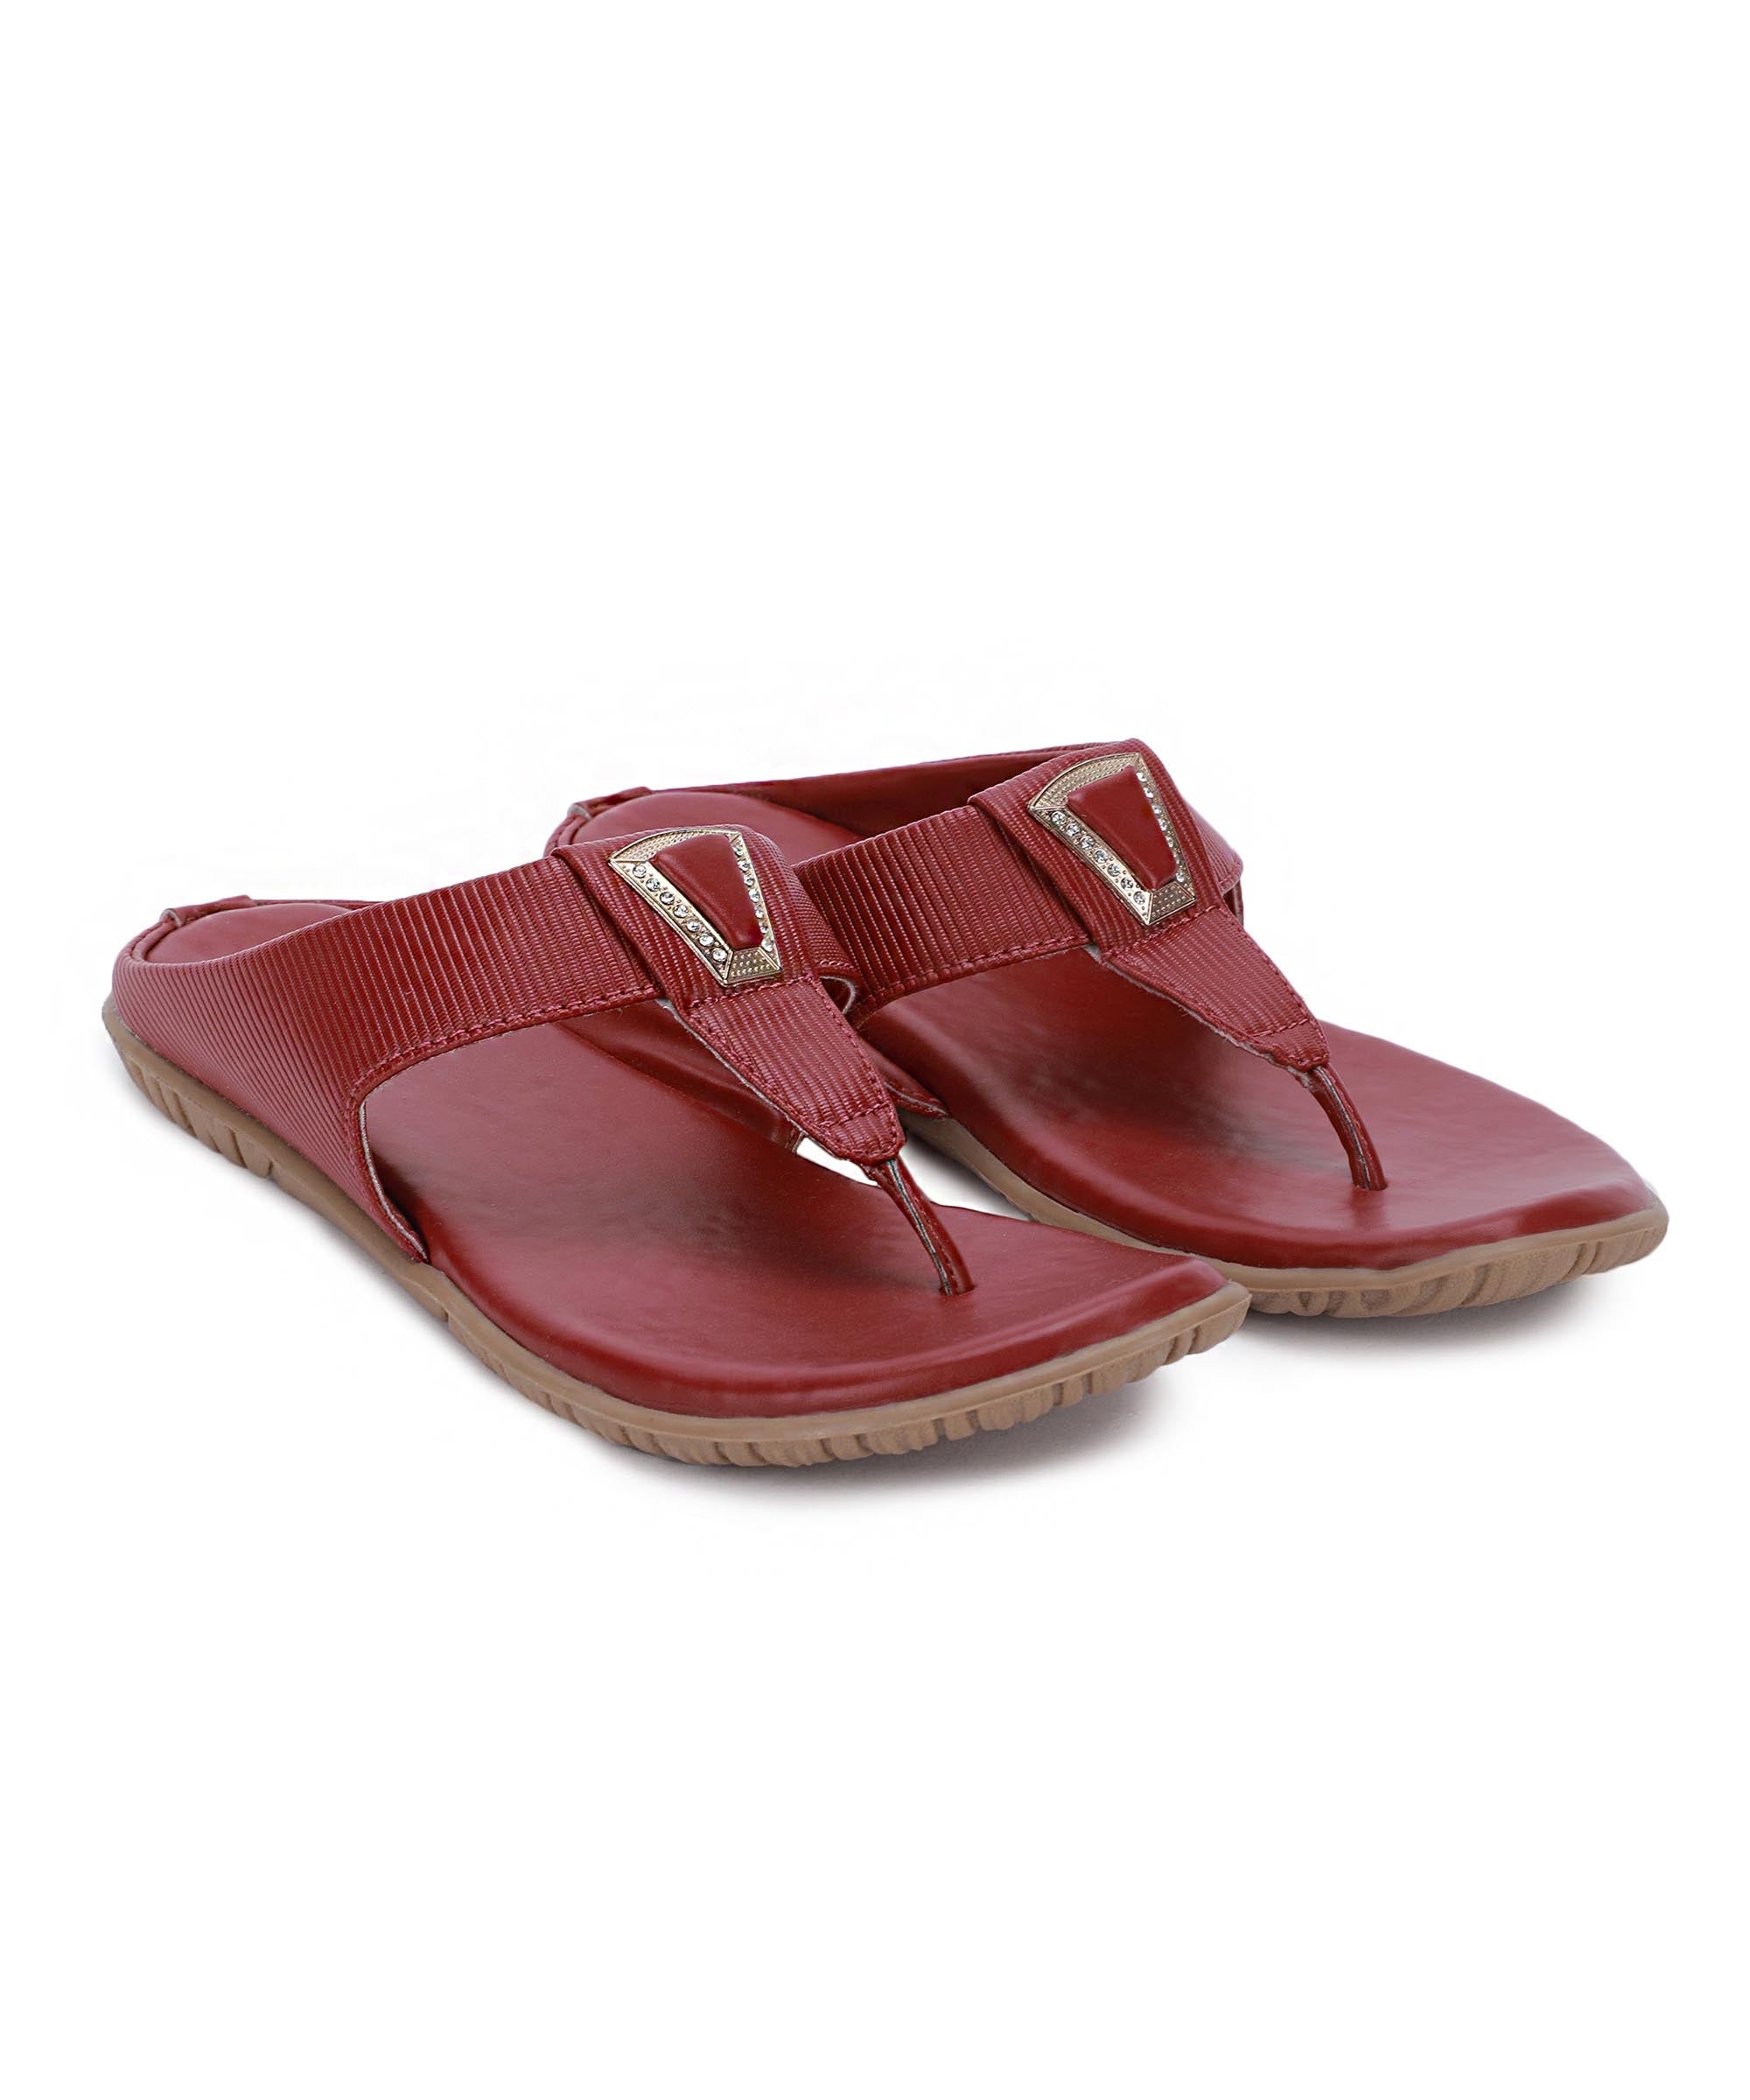 Paragon K6018L Women Sandals | Casual &amp; Formal Sandals | Stylish, Comfortable &amp; Durable | For Daily &amp; Occasion Wear